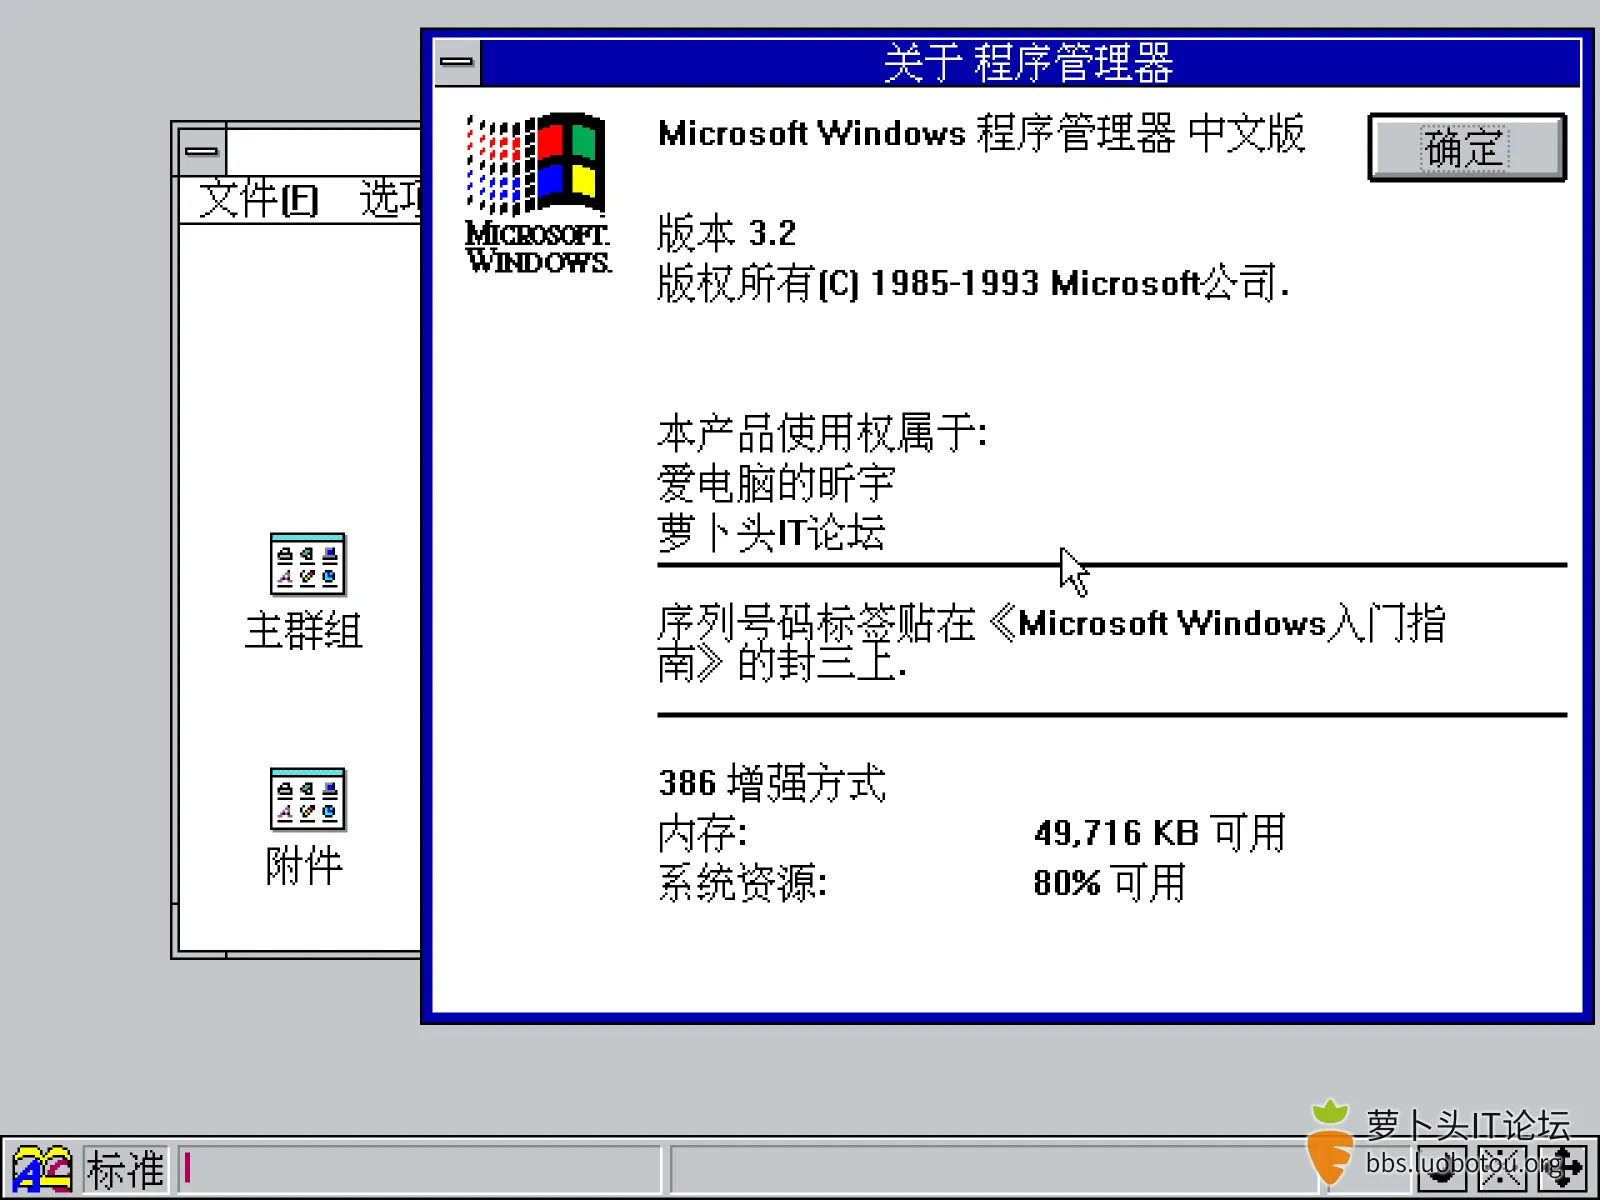 MS-DOS-2022-08-19-14-57-25.png